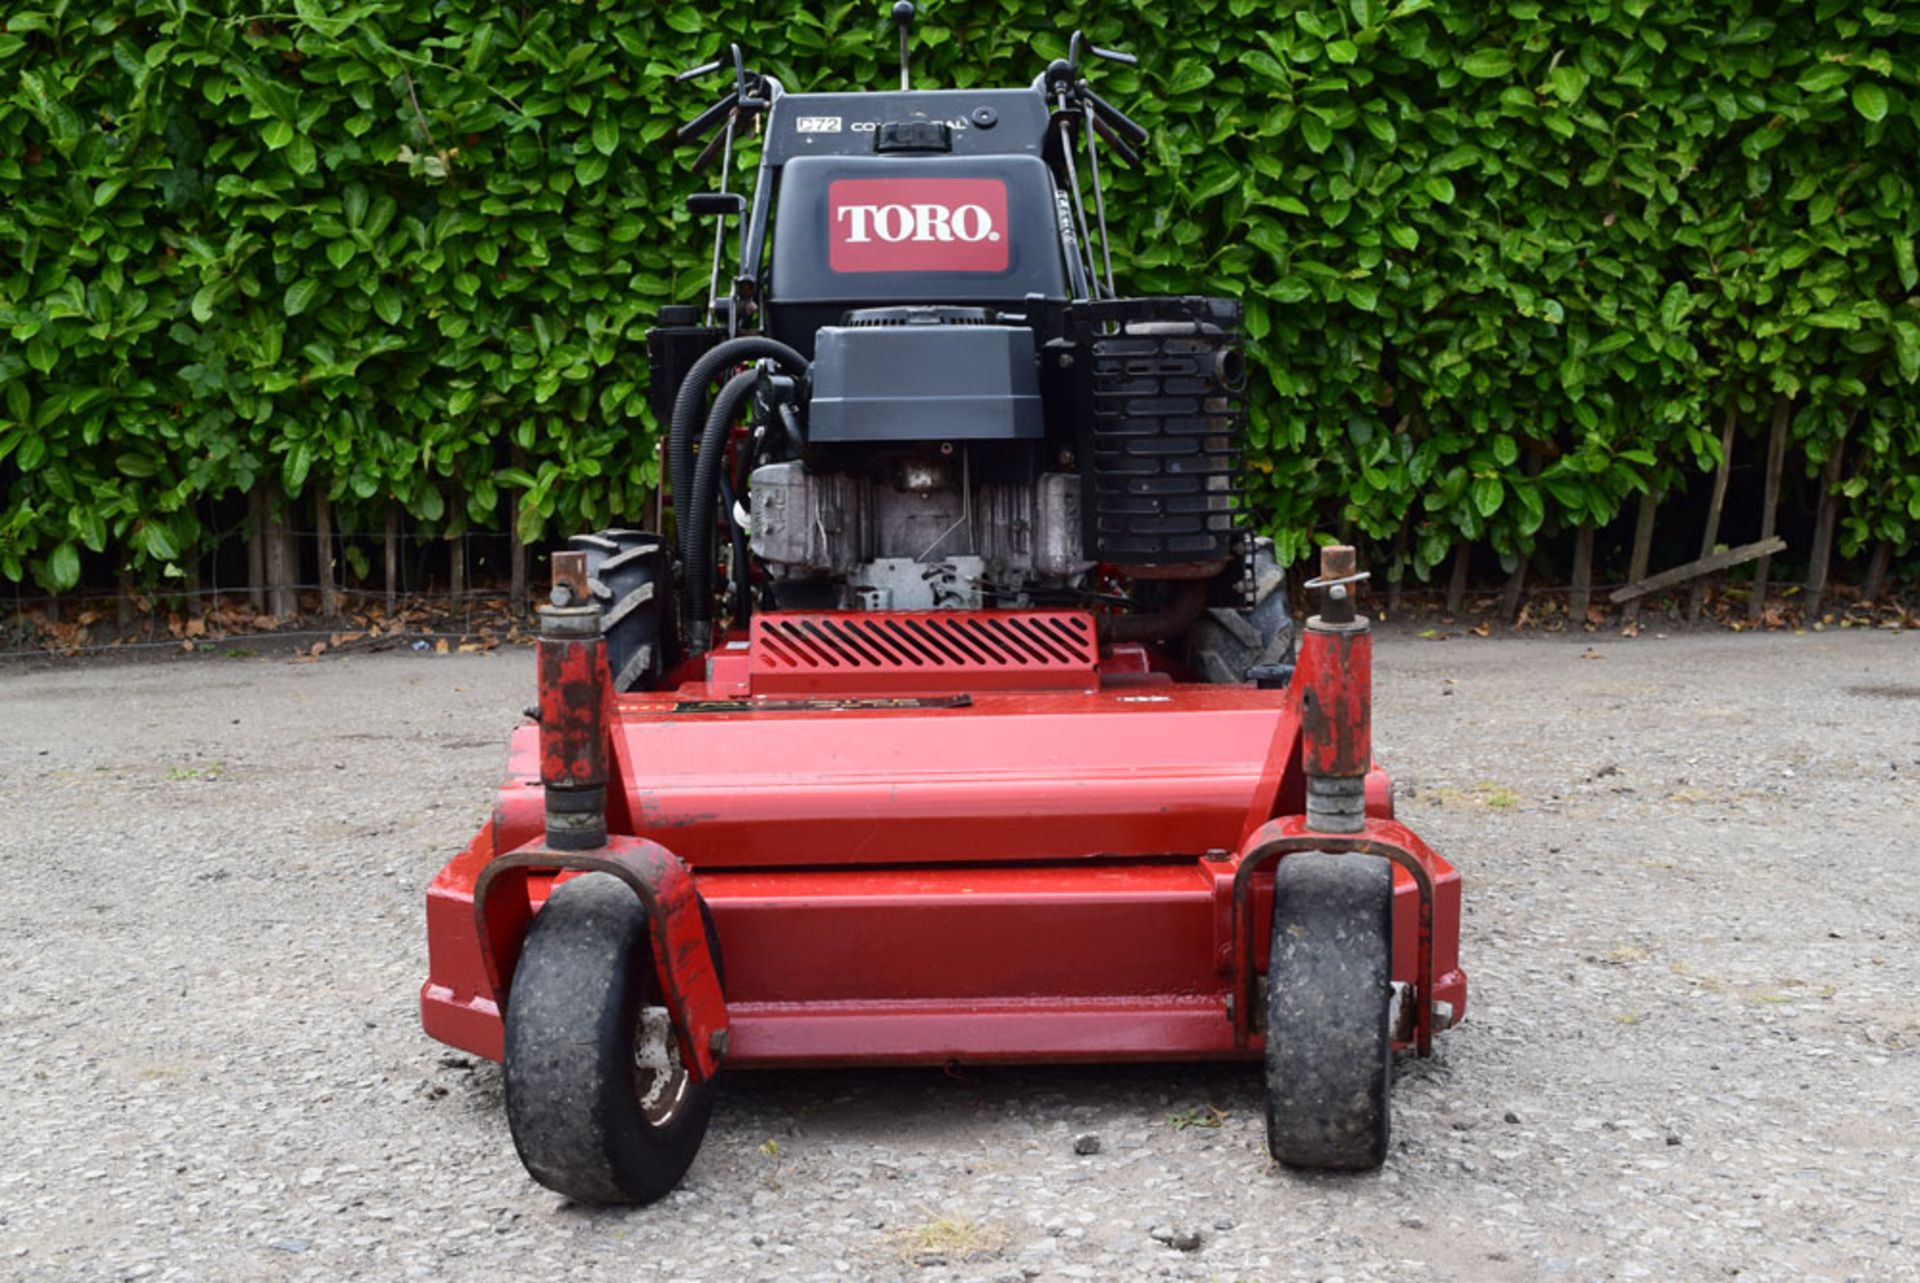 Toro Commercial Pedestrian 32" Commercial Walk Behind Zero Turn Rotary Mower - Image 4 of 6